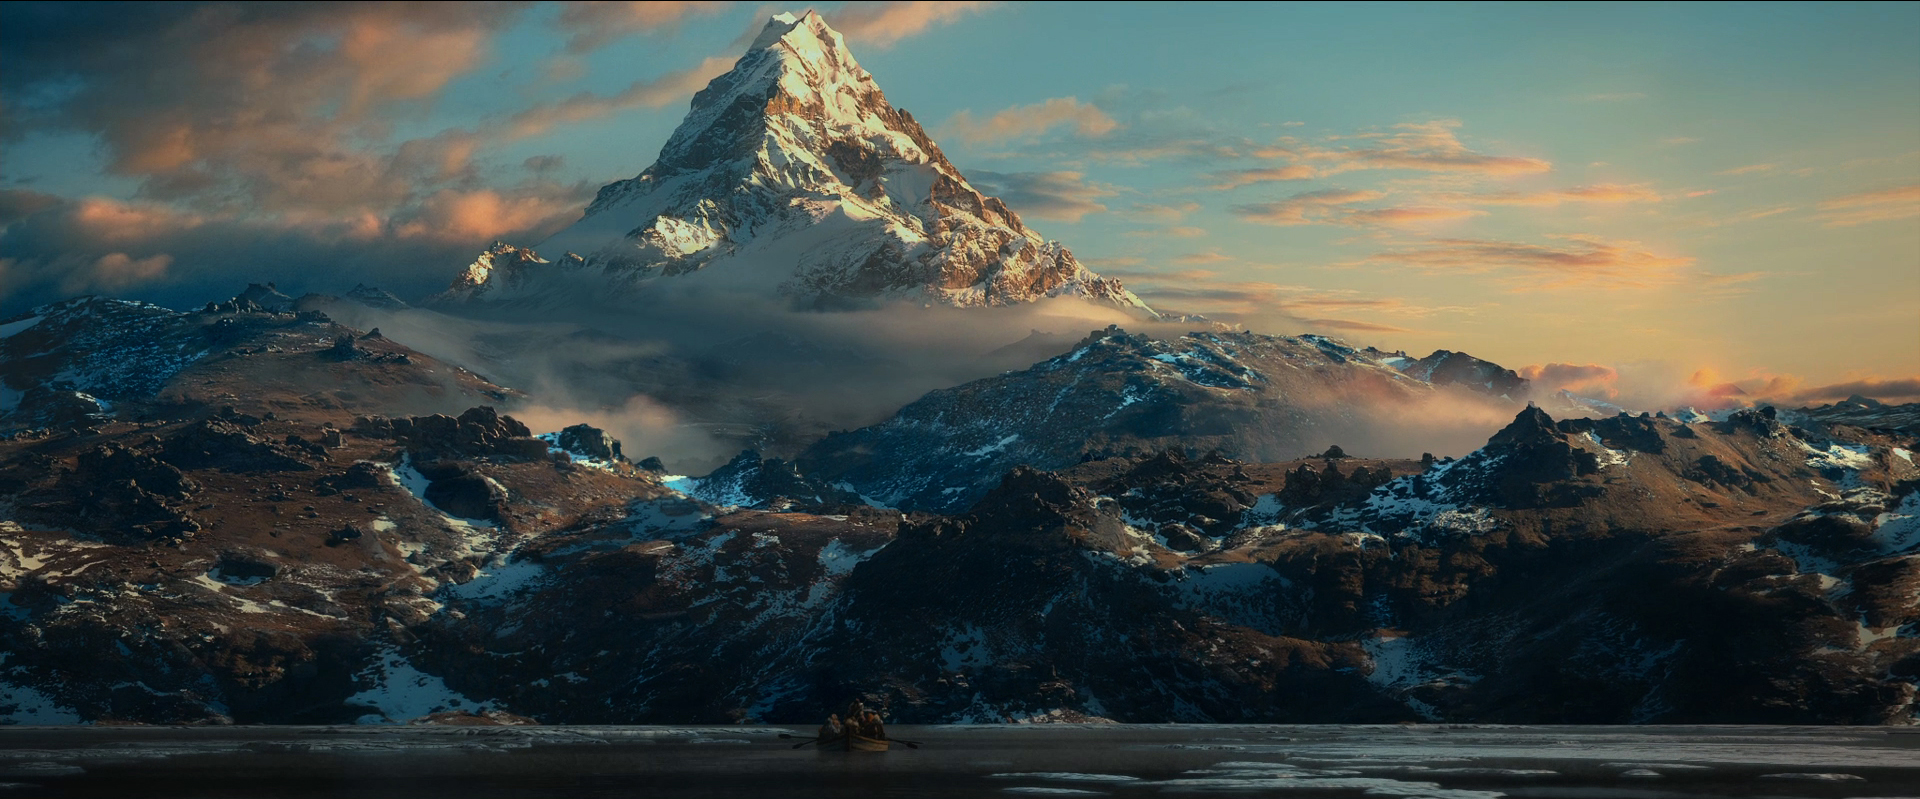 the-lonely-mountain